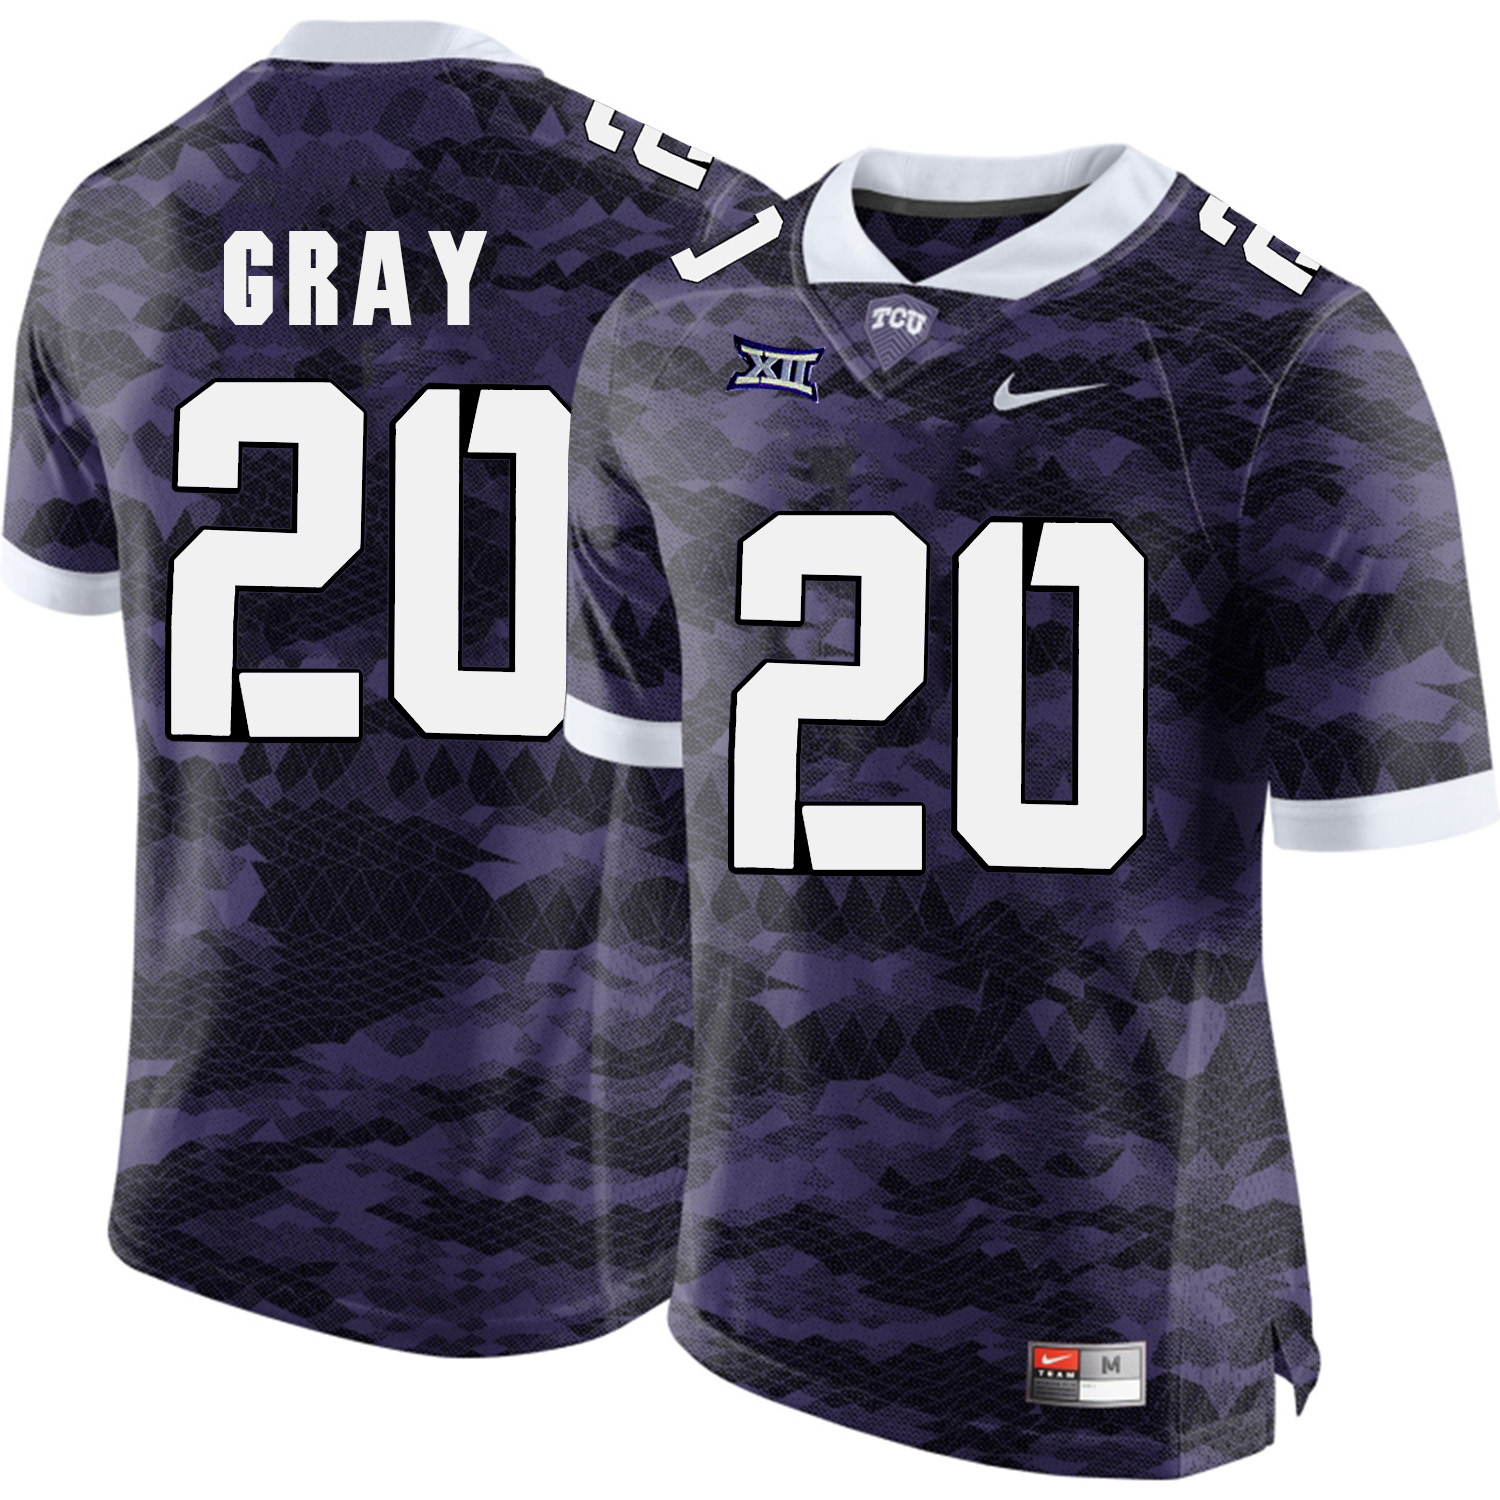 TCU Horned Frogs 20 Deante Gray Purple College Football Limited Jersey